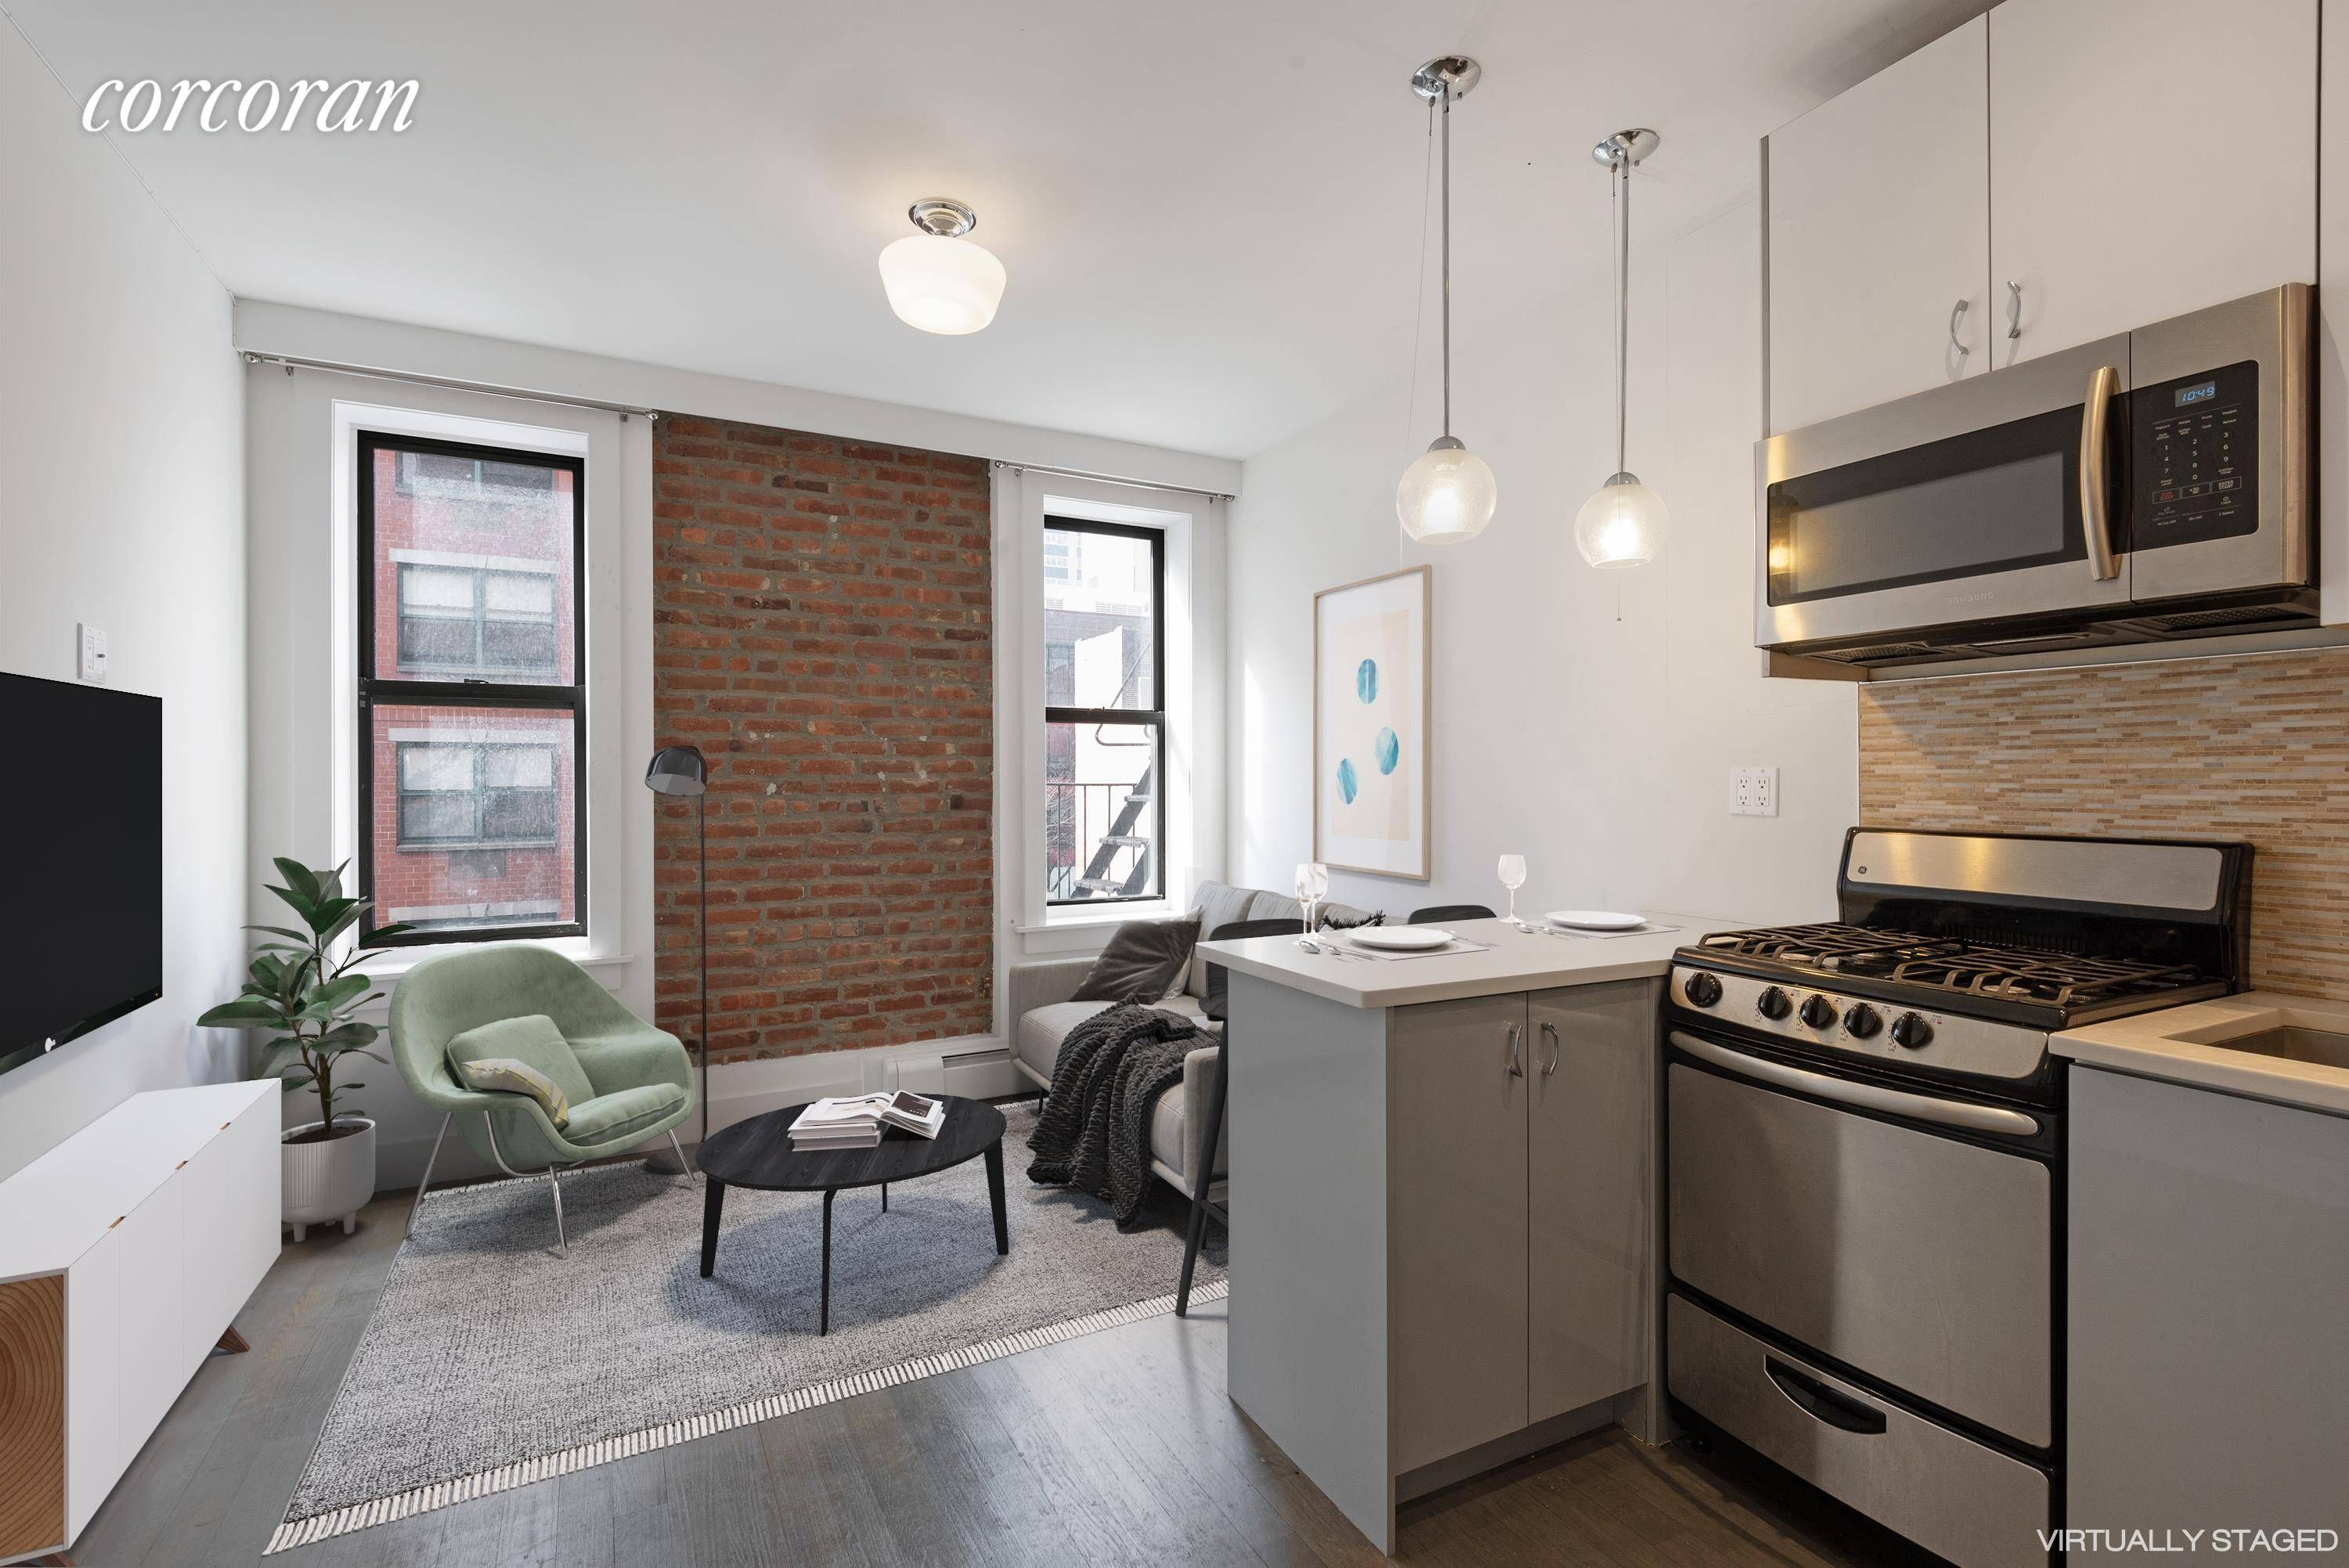 Welcome to Unit 3E at 48 West 138th Street A this stunning One Bedroom apartment in one of Manhattan's most up and coming neighborhoods.